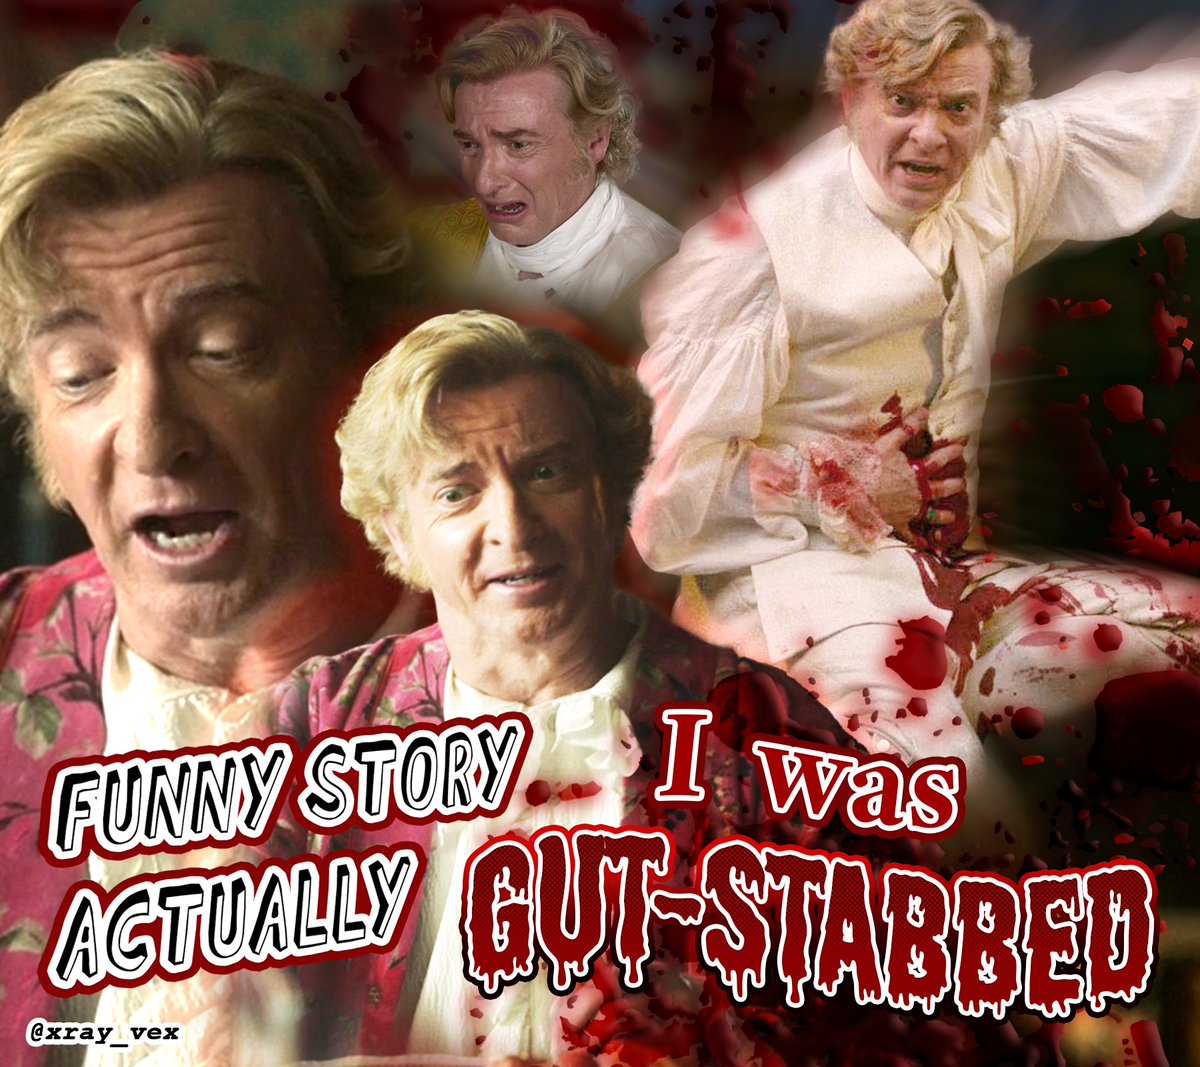 FUNNY STORY actually
i was
GUT-STABB'D
#ofmd #ofmdmeme